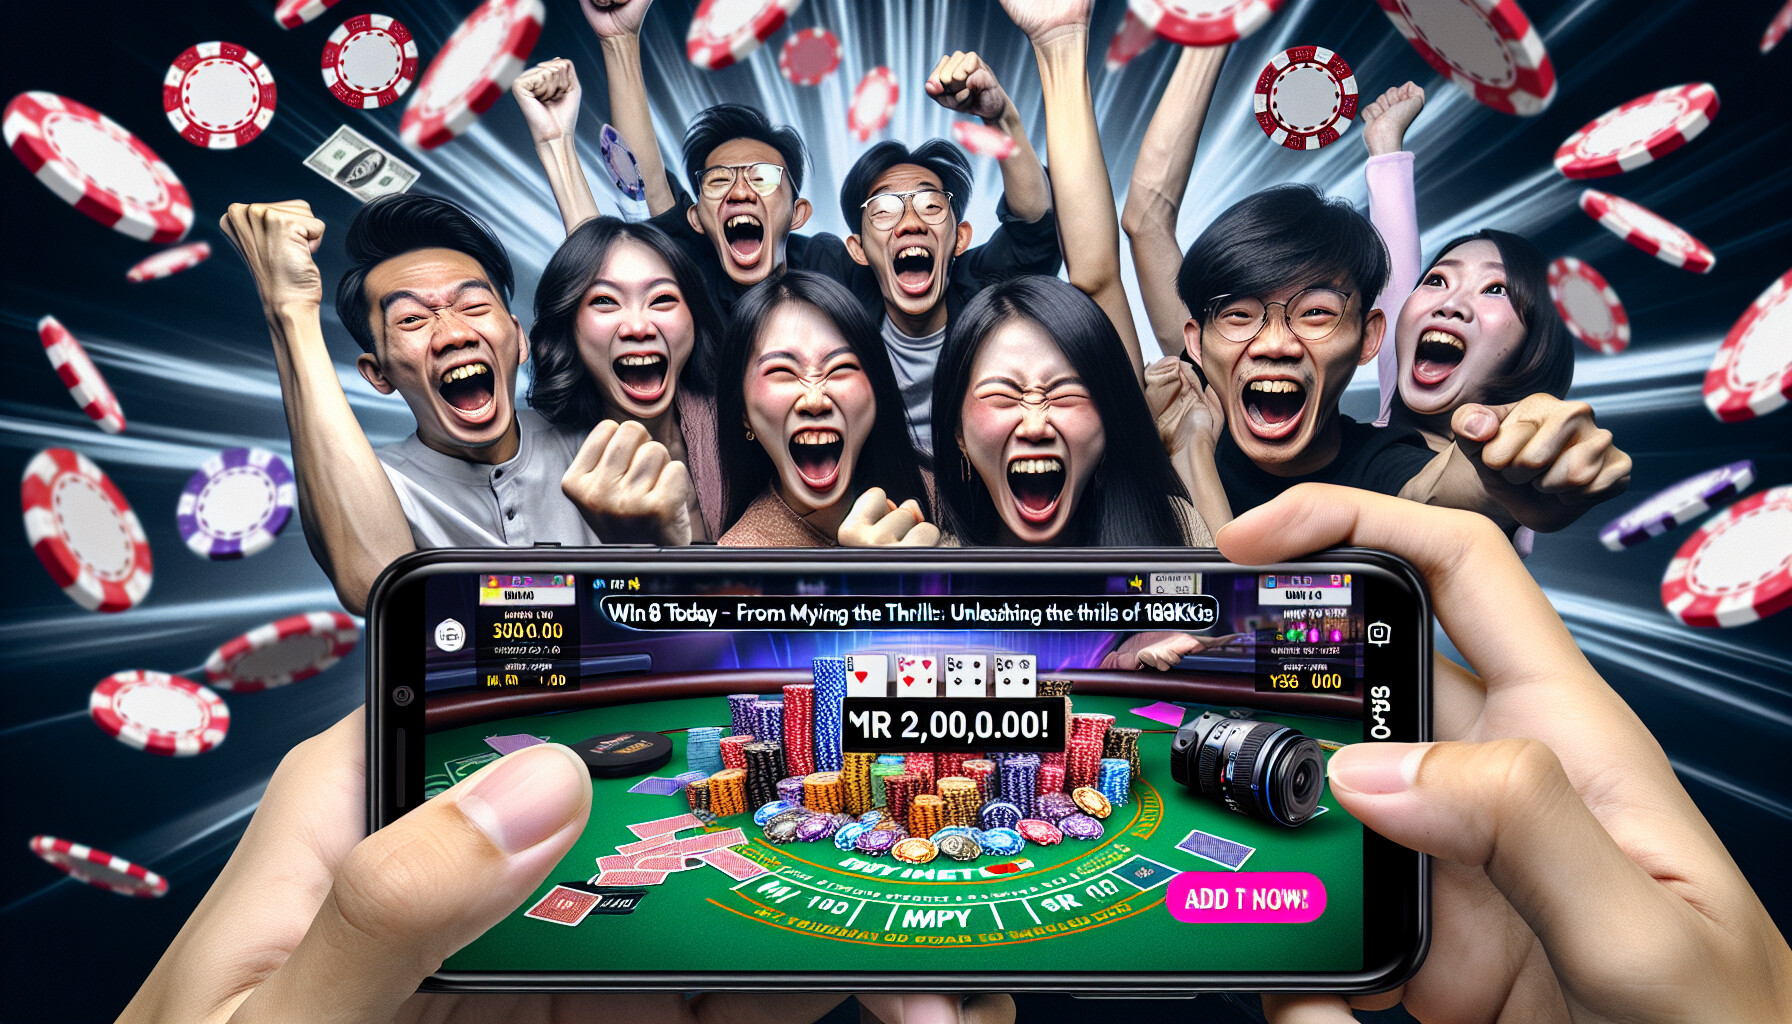  Get on a winning streak with 🎰 918kiss! Turn MYR 150.00 into MYR 2,000.00 now! Don't miss out on the thrill and cash prize! 💰💸 